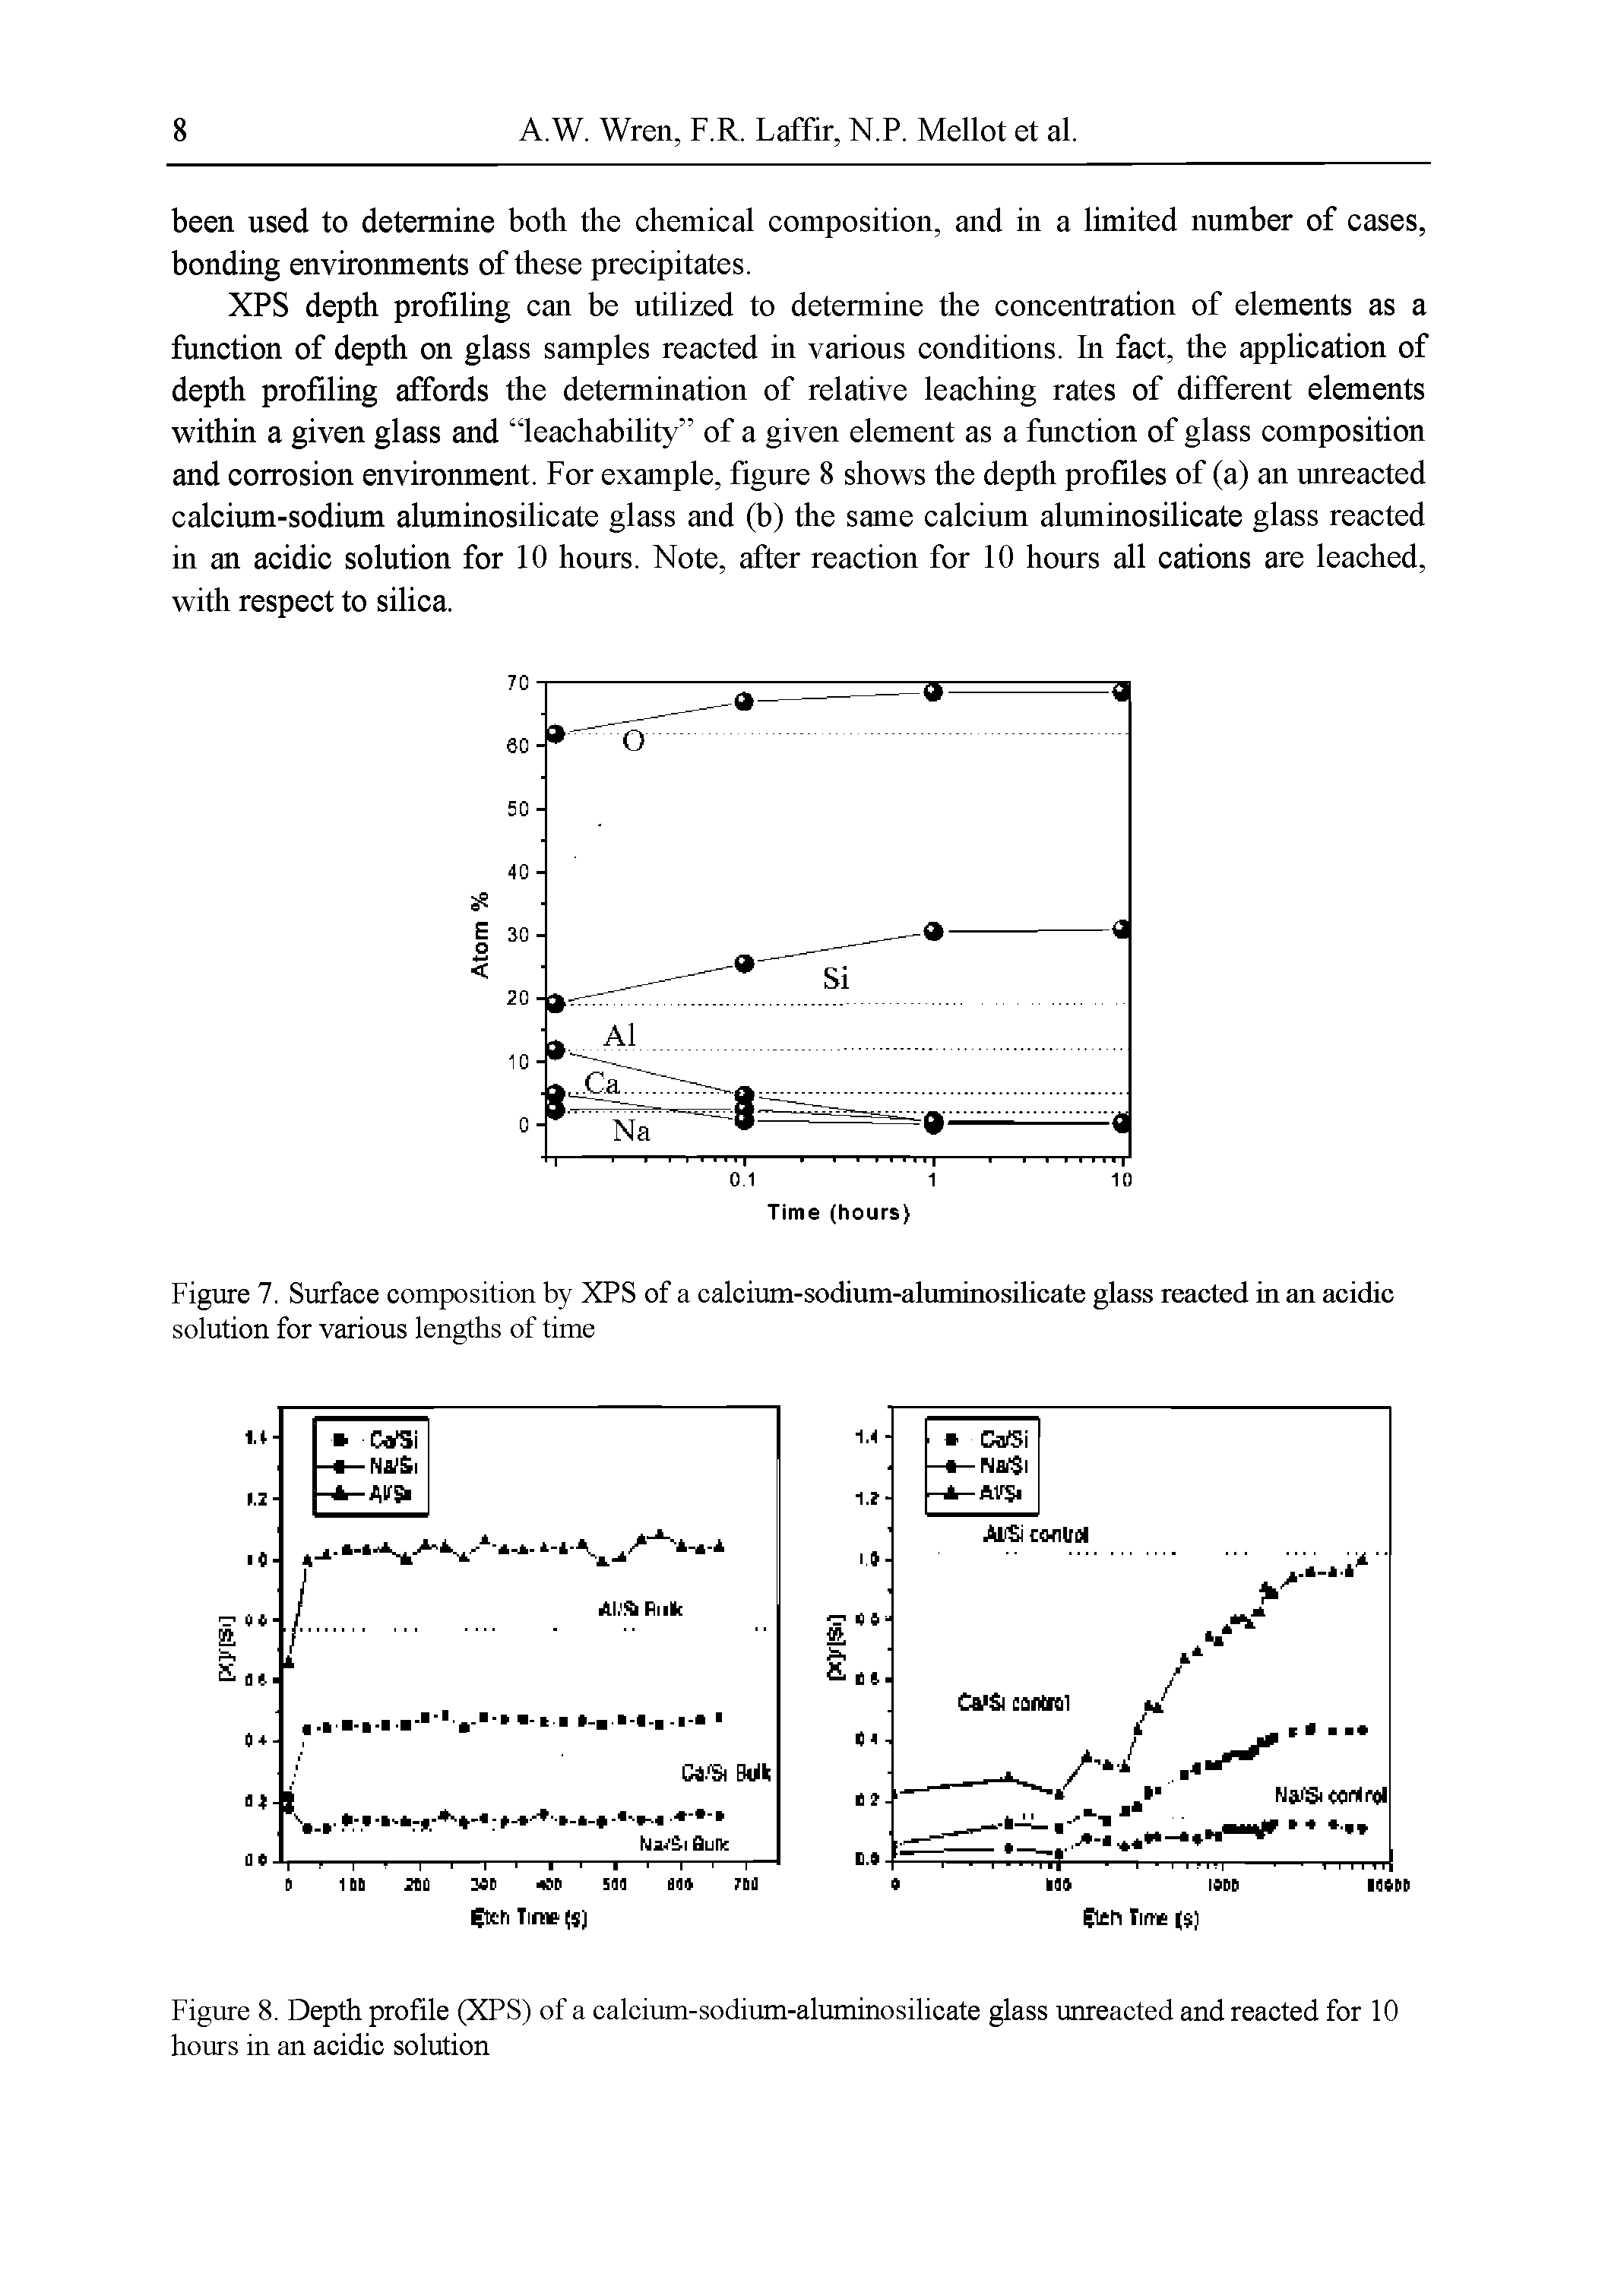 Figure 8. Depth profile (XPS) of a calcium-sodium-aluminosilicate glass unreacted and reacted for 10 hours in an acidic solution...